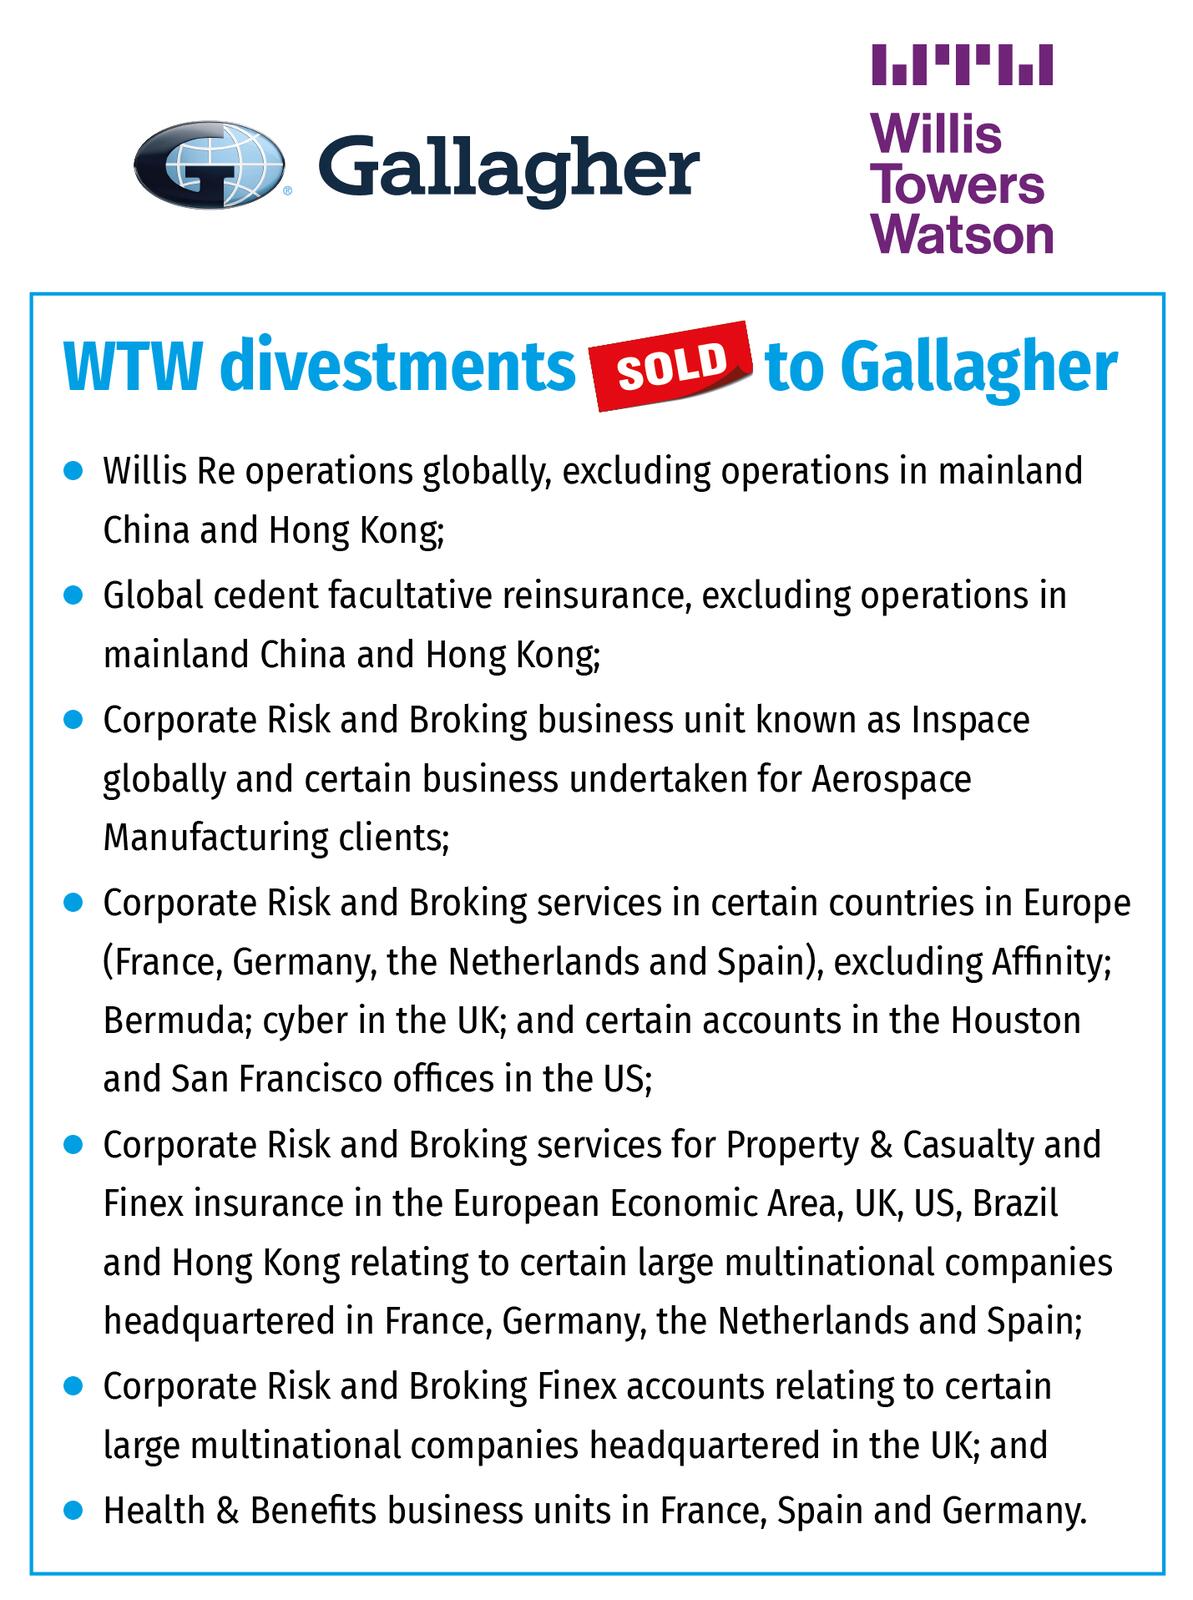 WTW divestments sold to Gallagher